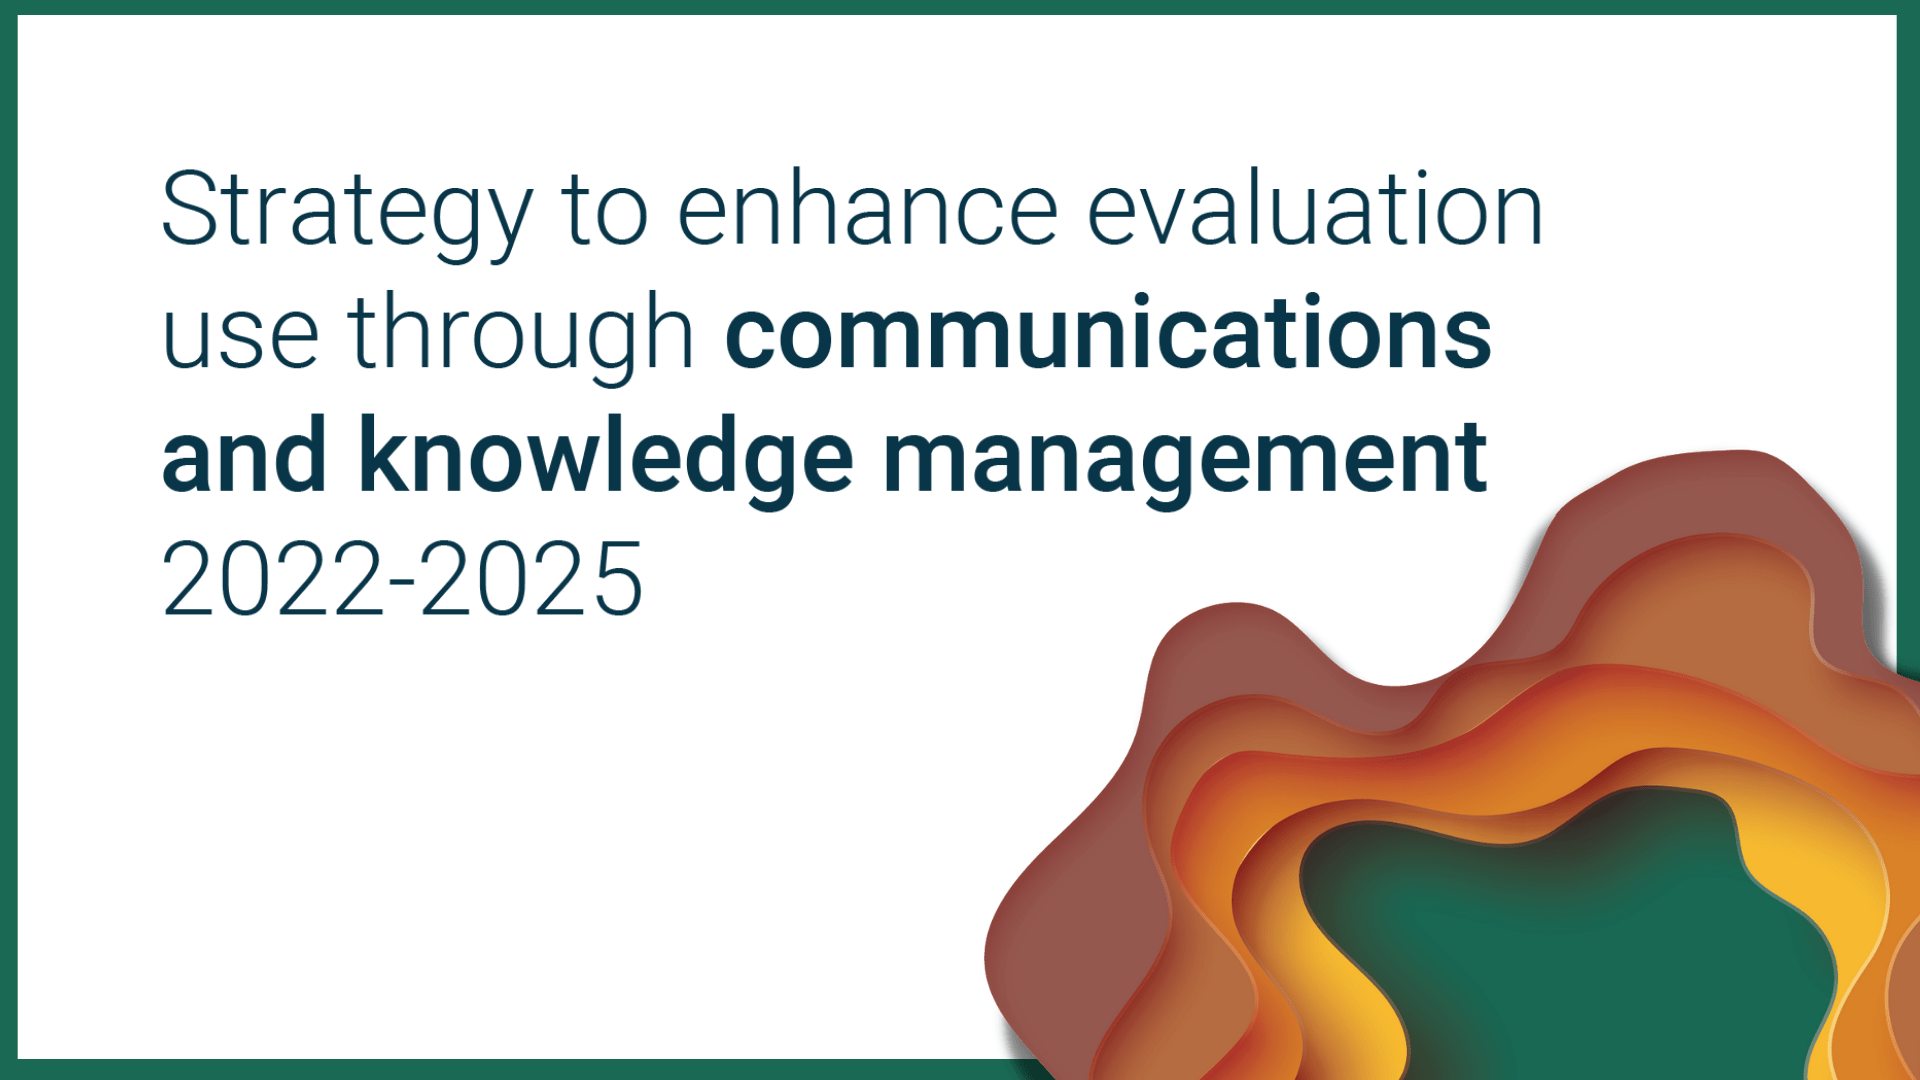 Strategy to enhance evaluation use through communications and knowledge management, 2022-2025